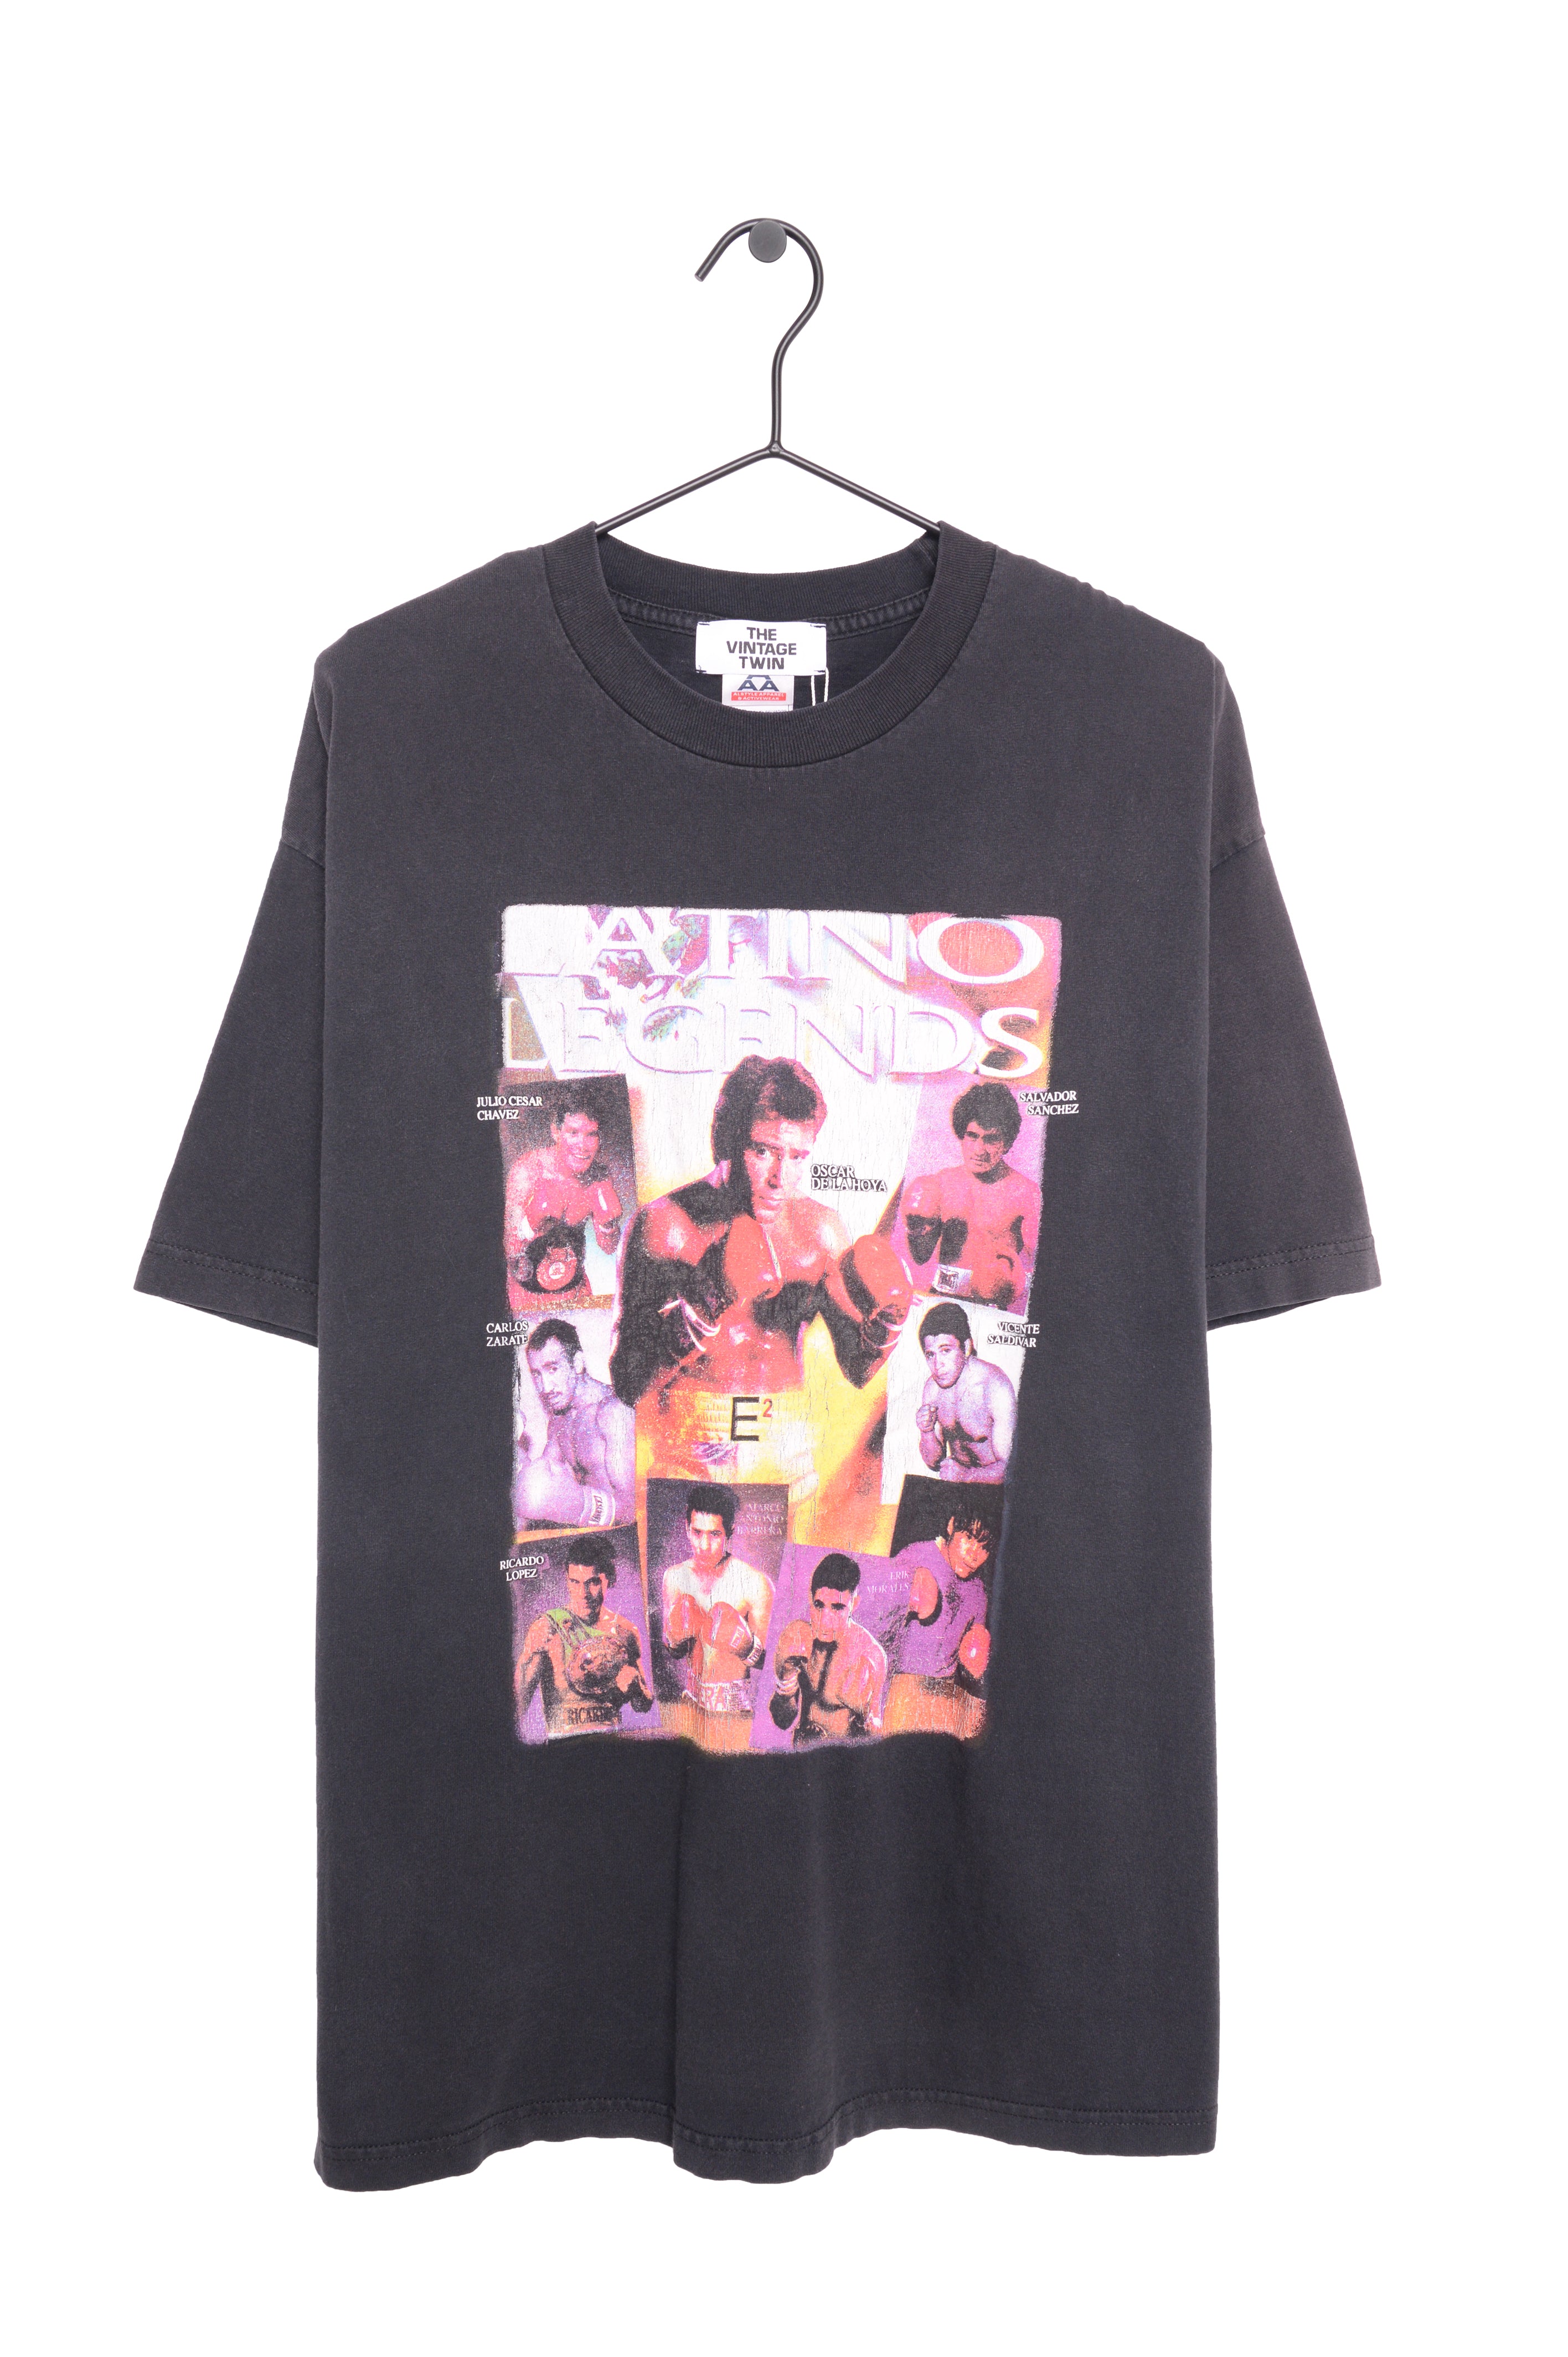 Alstyle Apparel Activewear 1990's T Shirt